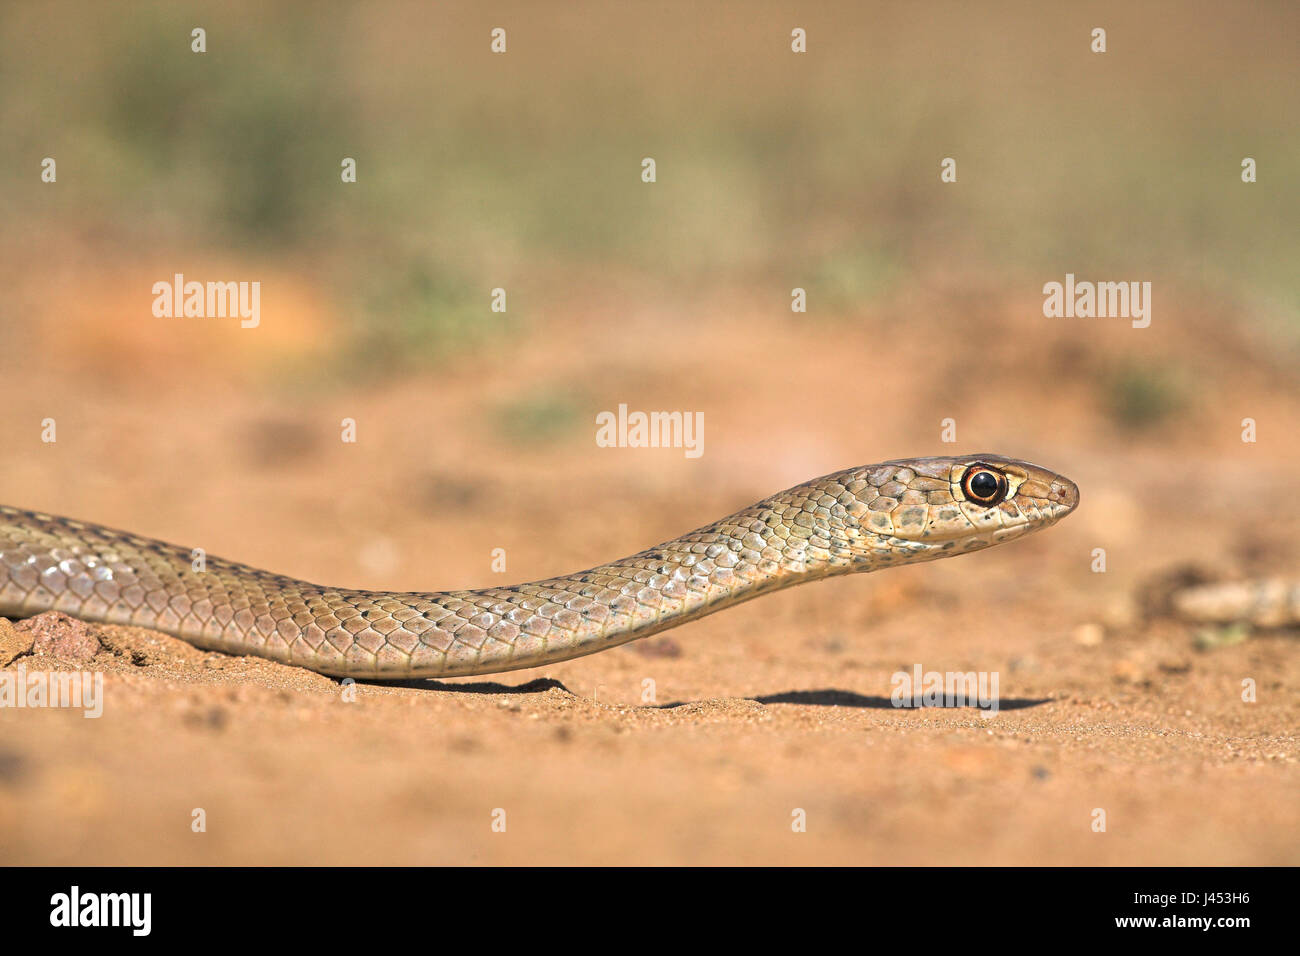 Portret van de pijlsnelle olive whip snake op zand; portrait of the extremely fast olive whip snake on sand. Portret van de pijlsnelle korsnuitsweepslang op zand; portrait of the extremely fast short-snouted whip snake on sand. Stock Photo